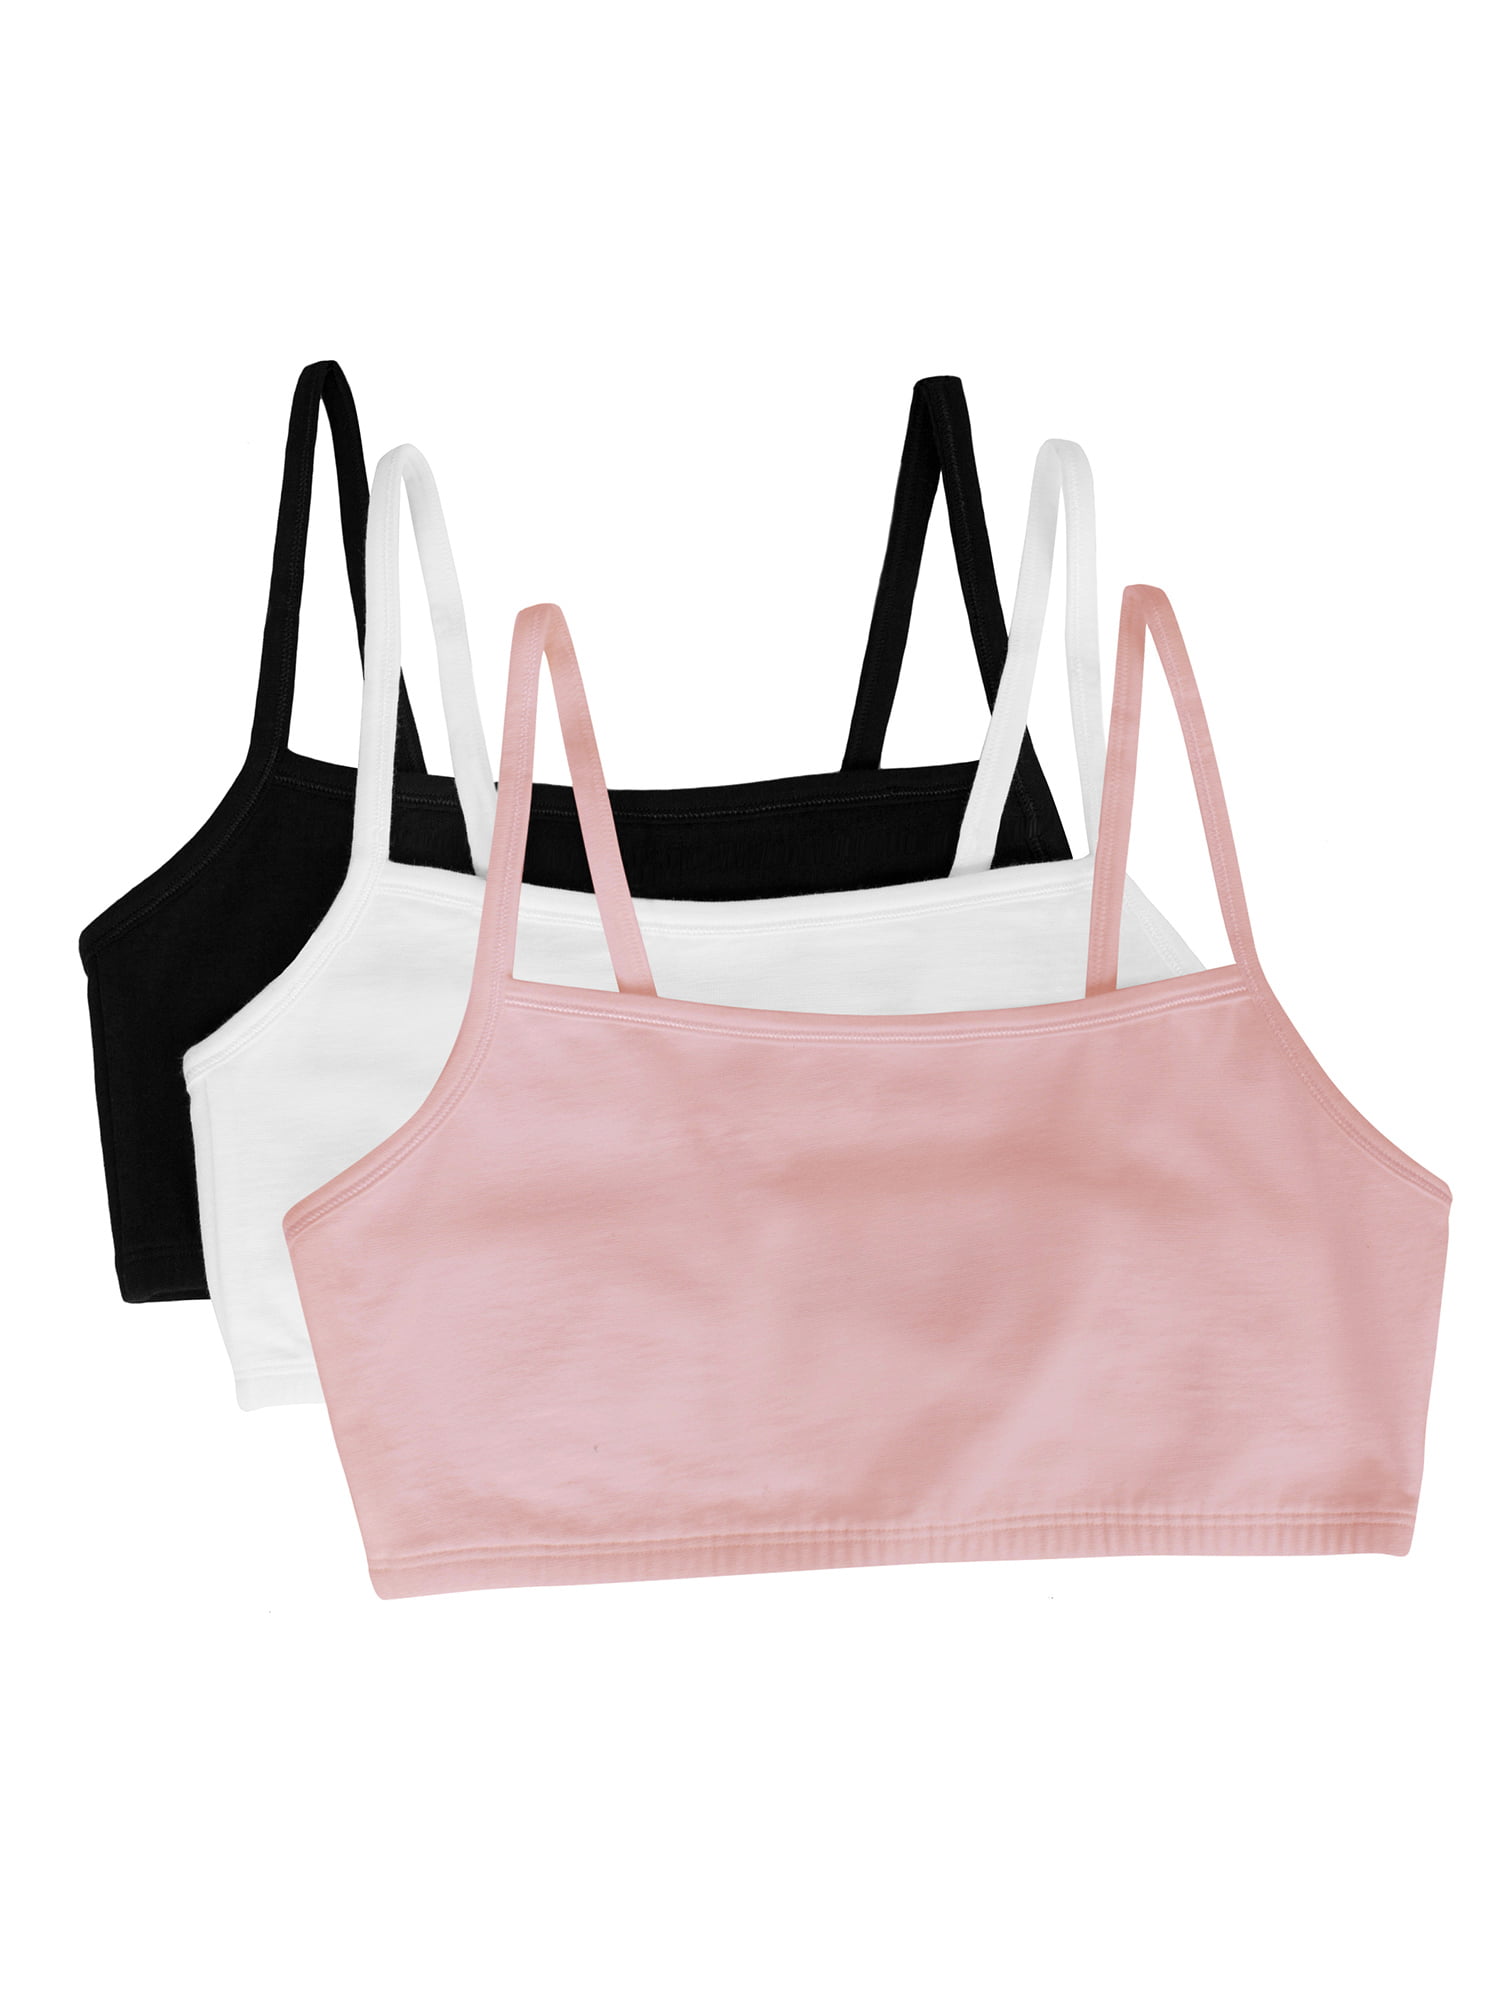 3-Pack Fruit of the Loom Women's Spaghetti Strap Cotton Sports Bra (Sizes  32-44, Rose/White/Black) $7.45 ($2.48 each) + Free S&H w/ Walmart+ or $35+  or Free Store Pickup at Walmart